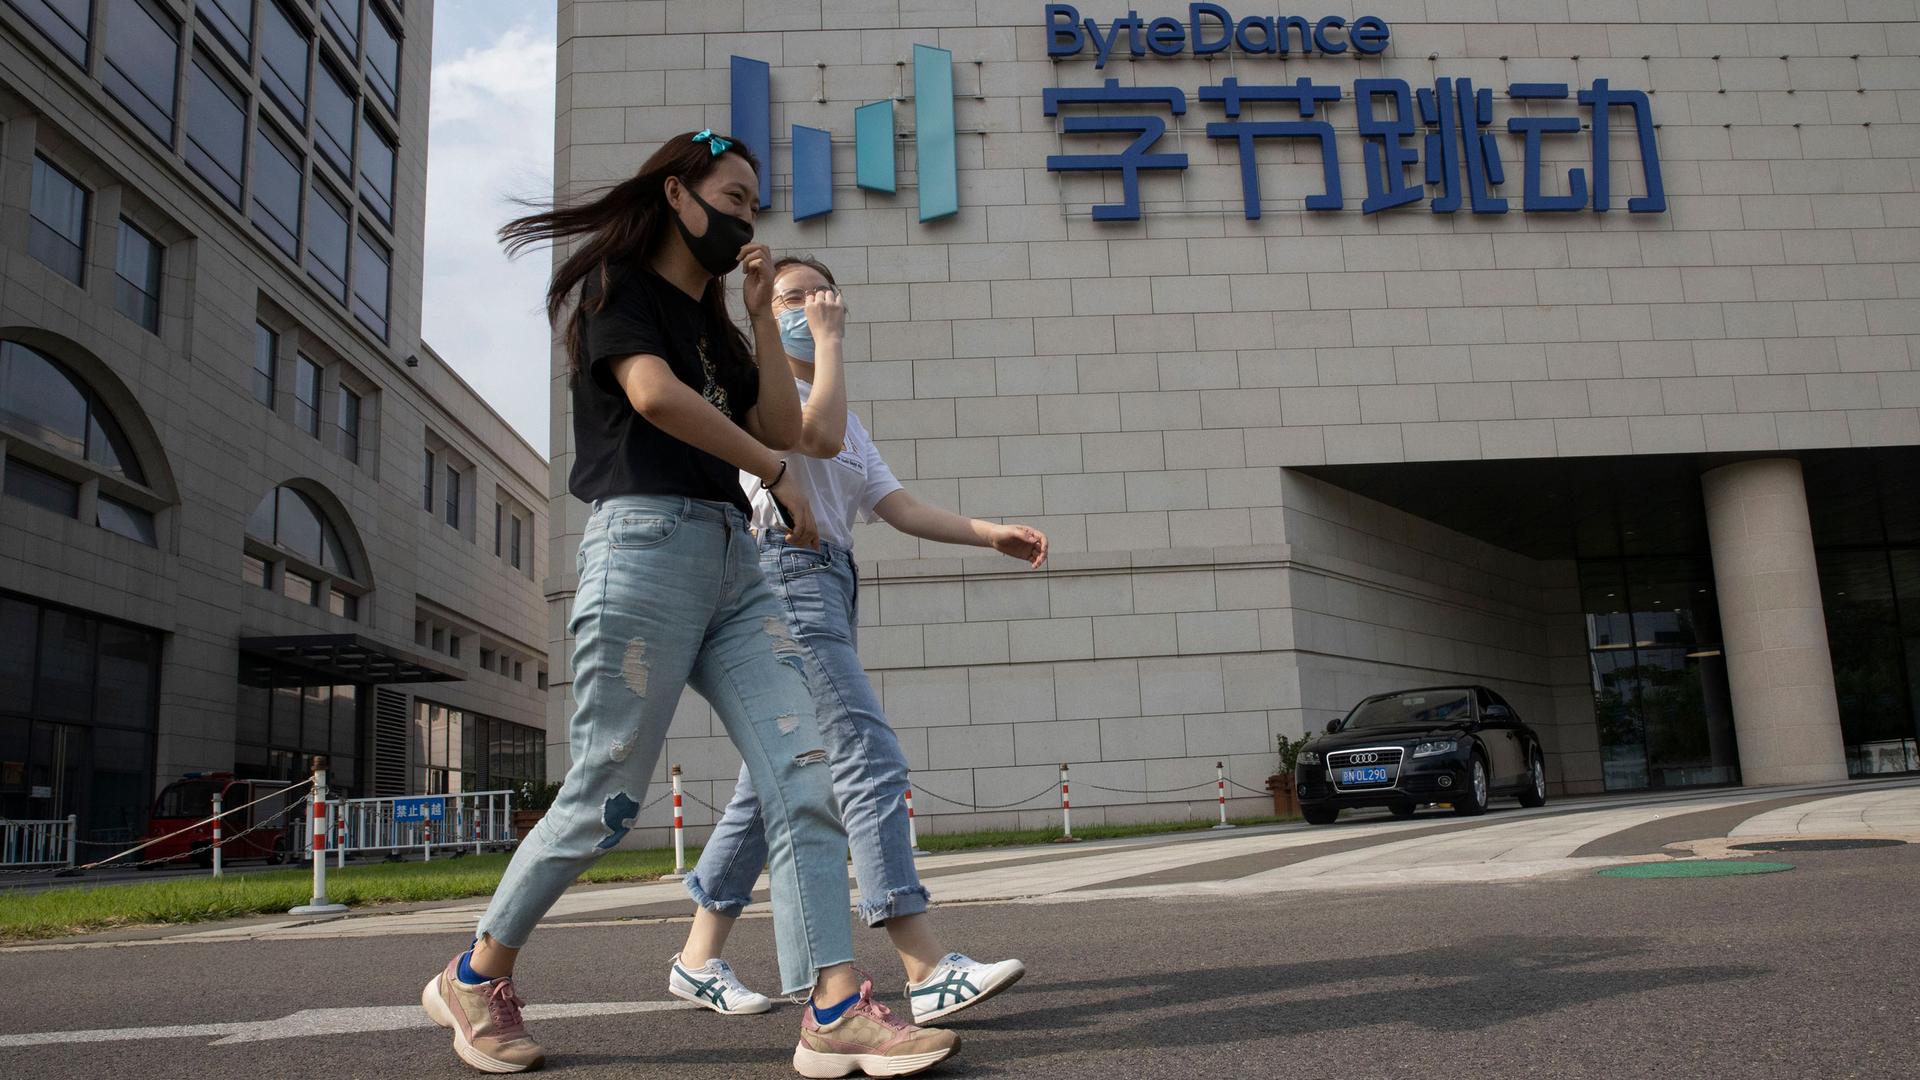 Two women are shown wearing jeans and face masks while walking past the ByteDance headquarters with large English and Chinese writing on the side.